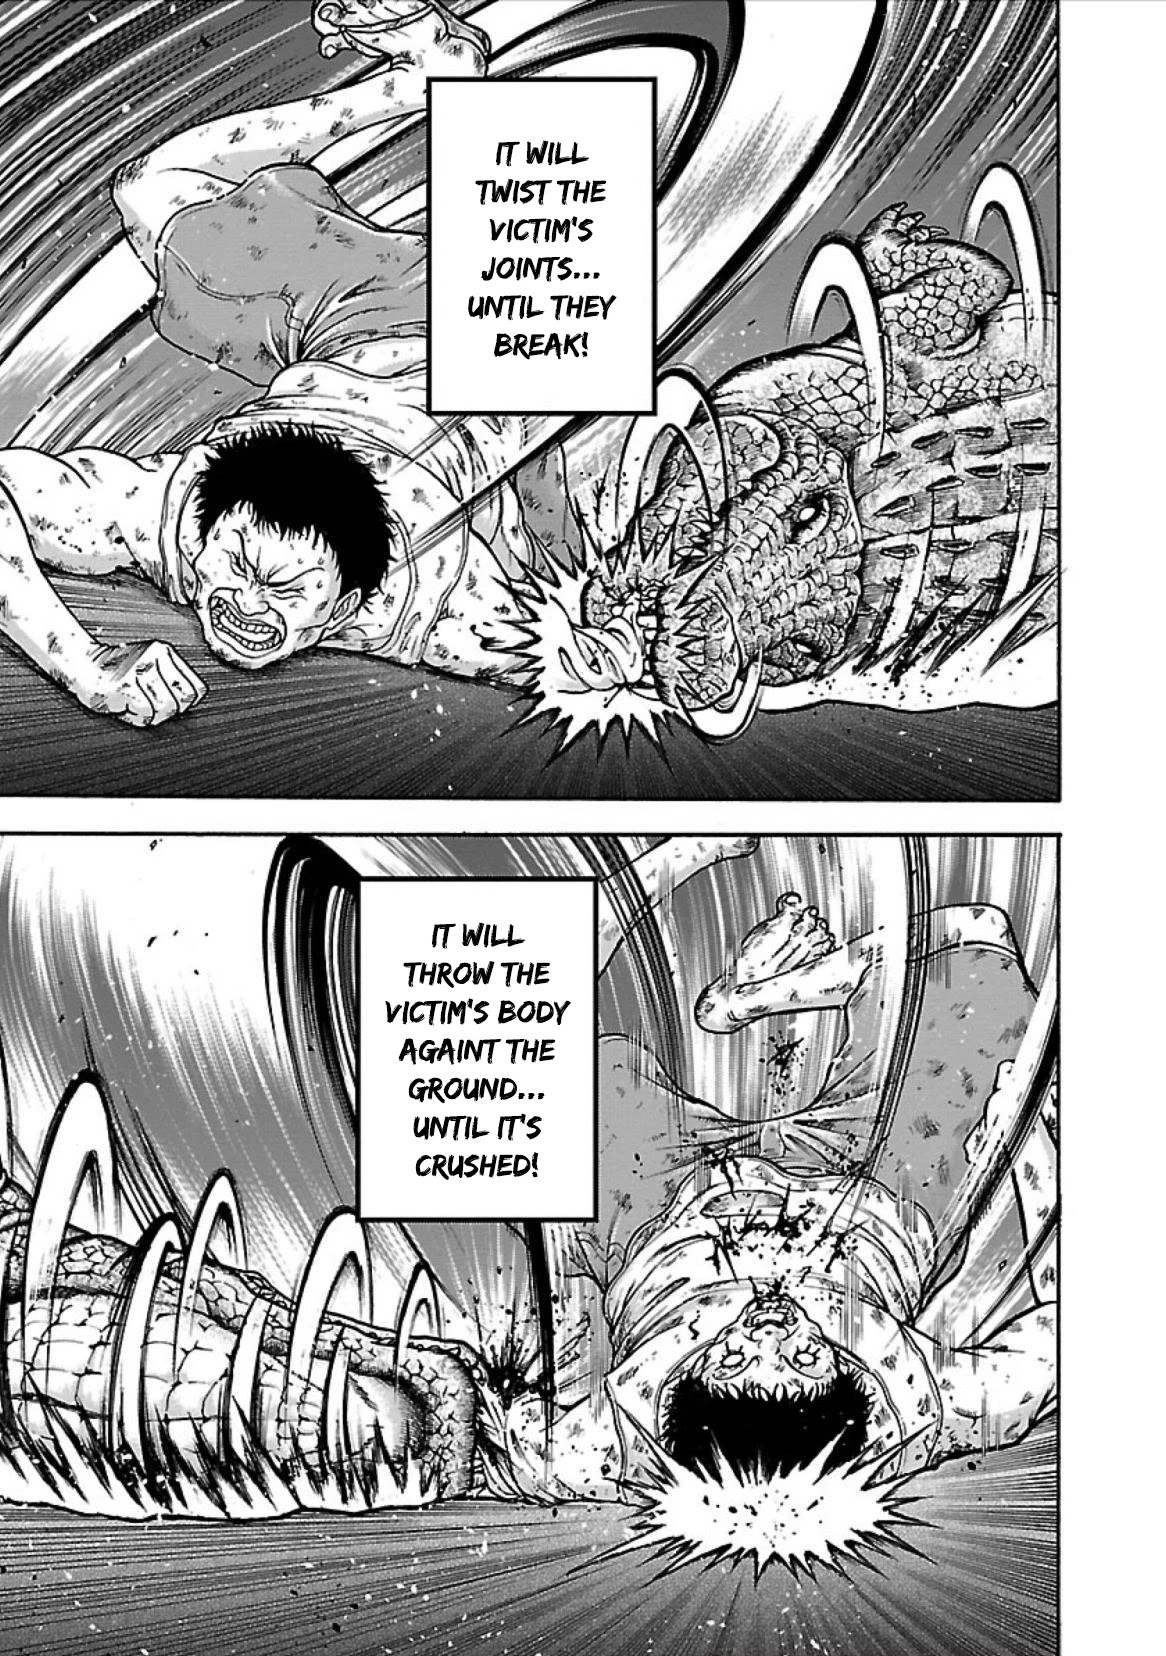 Baki Side Story - Retsu Kaioh Doesn't Mind Even If It's In Another World - Page 3